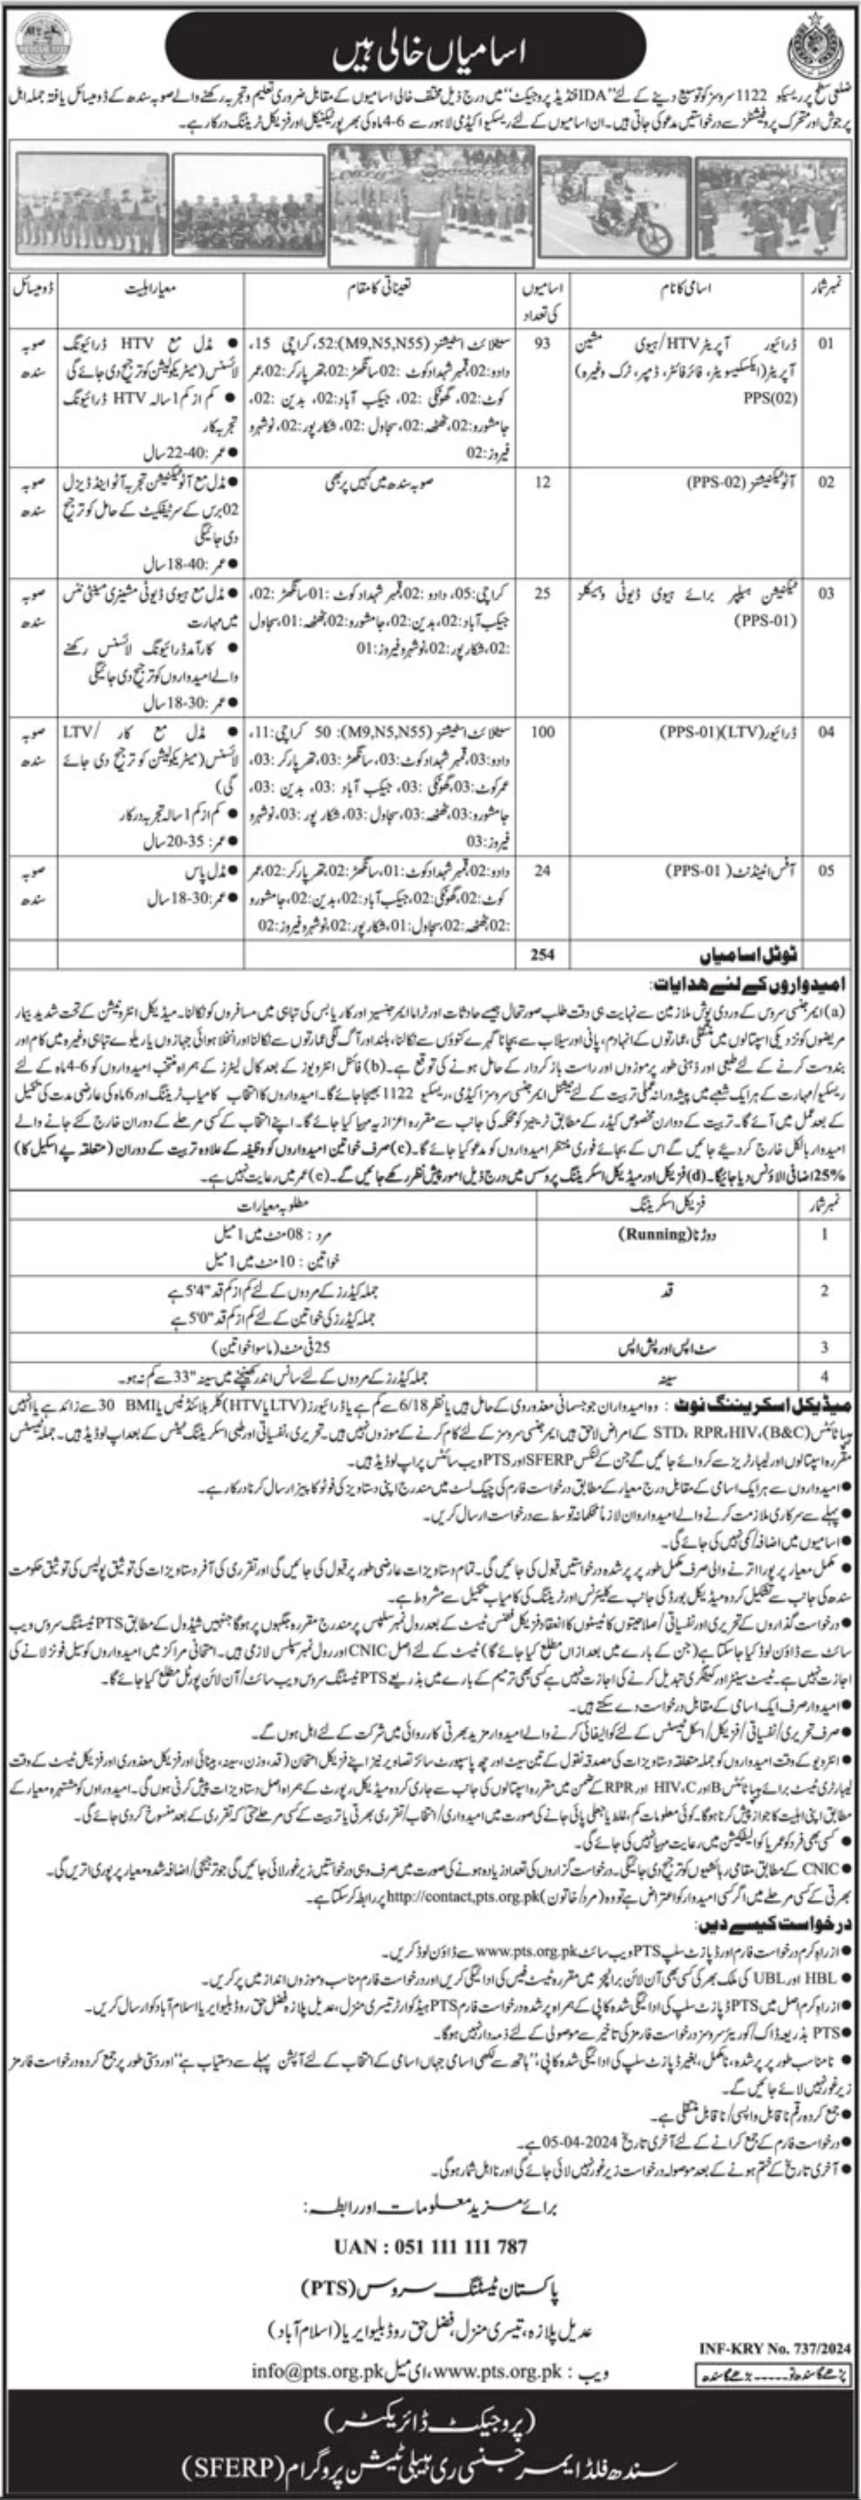 Sindh Rescue 1122 Jobs 2024 PTS Apply Online (434+ Seats)